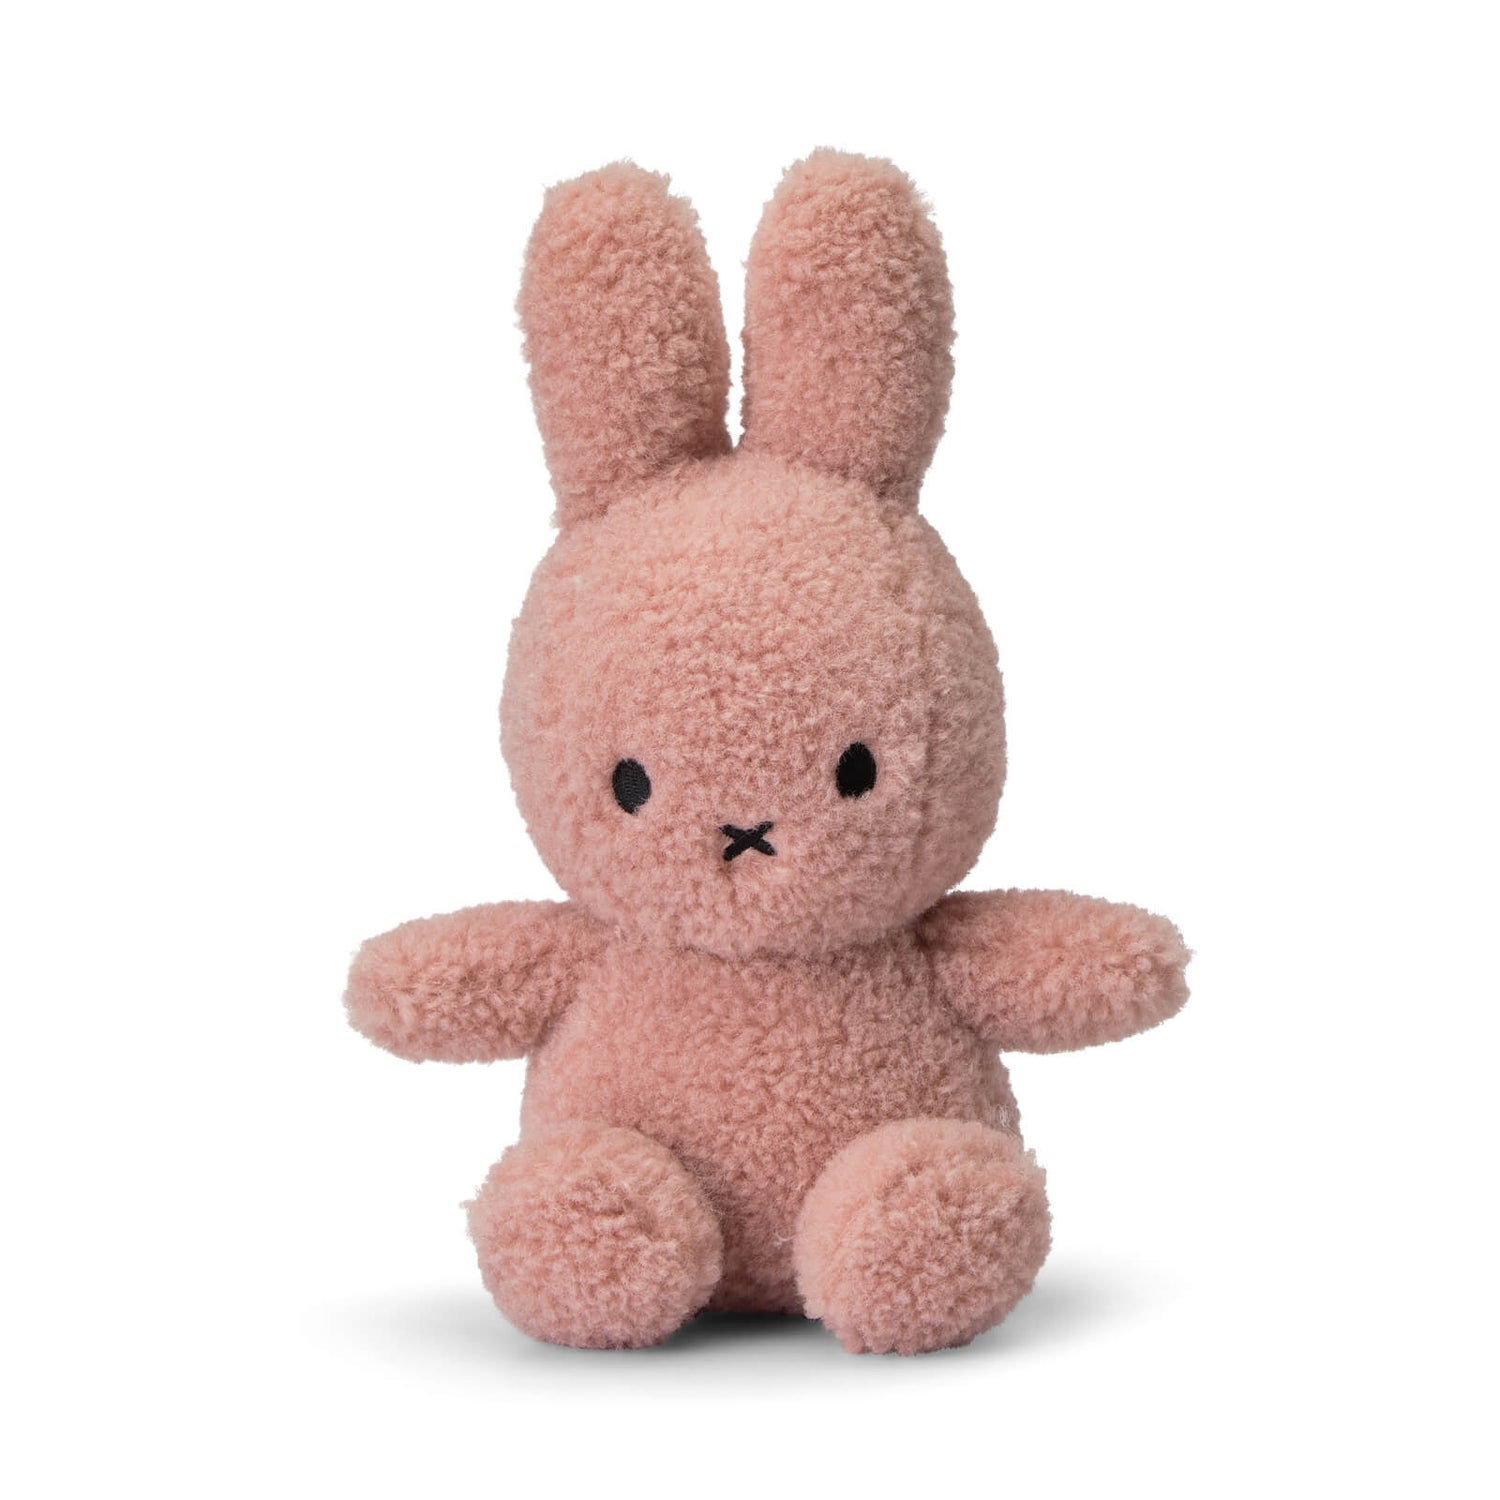 Miffy Recycled Teddy Sitting Toy - Pink